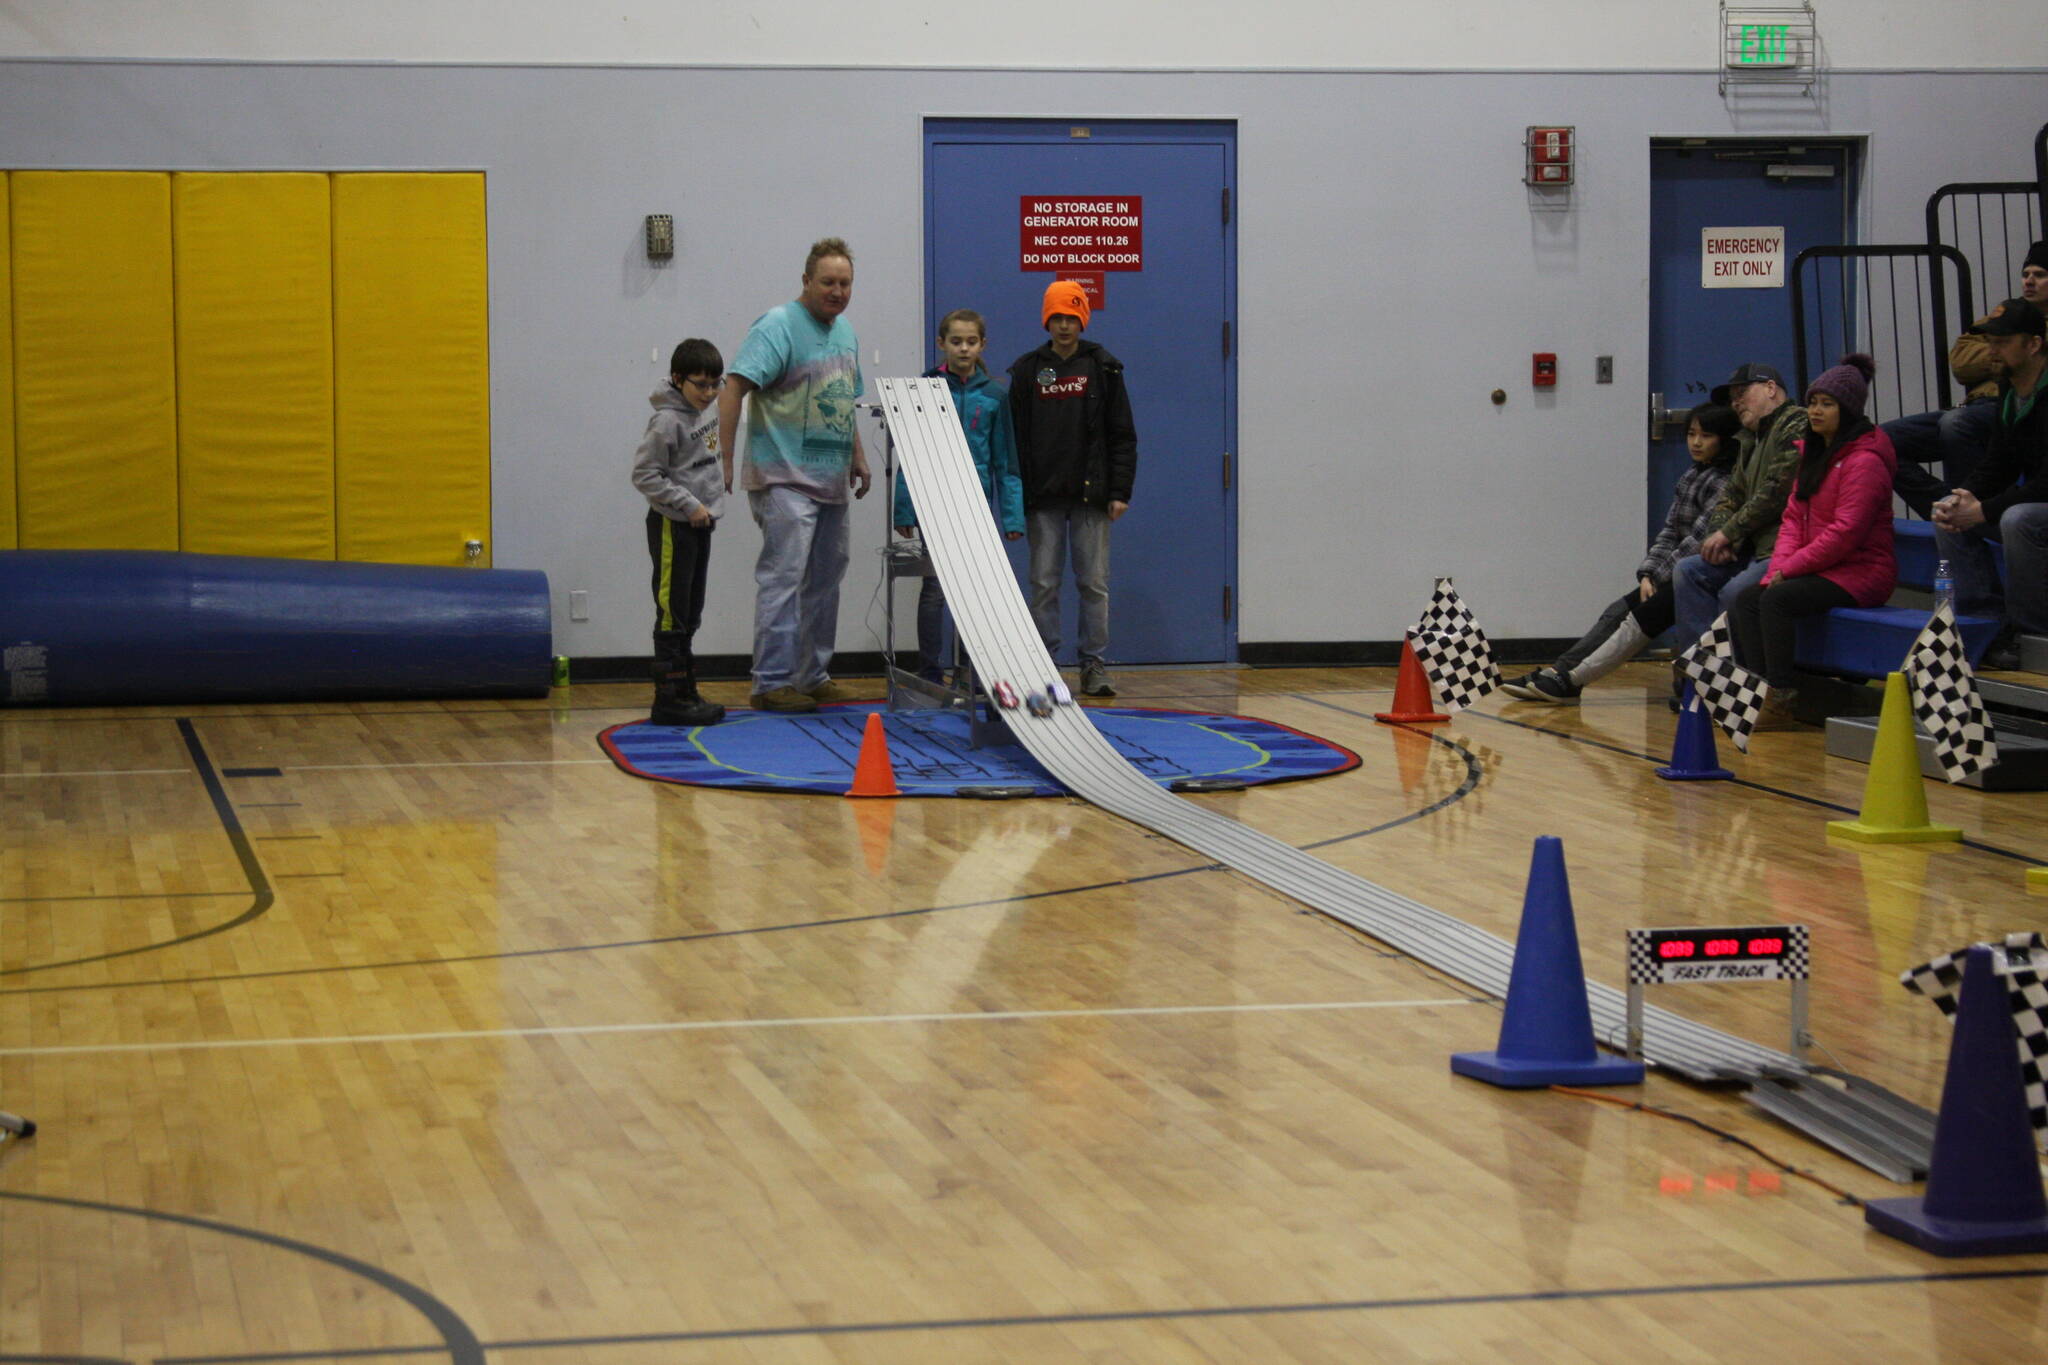 Pinewood derby contestants Simon Smith, Rox Shafer, and Jack Roderick and event volunteer Mike Smith watch the cars race down the track in the Chapman School gym on Saturday<ins>,</ins><ins> March 4</ins> in Anchor Point<ins>,</ins> <ins>Alaska</ins>. (Photo by Delcenia Cosman/Homer News)